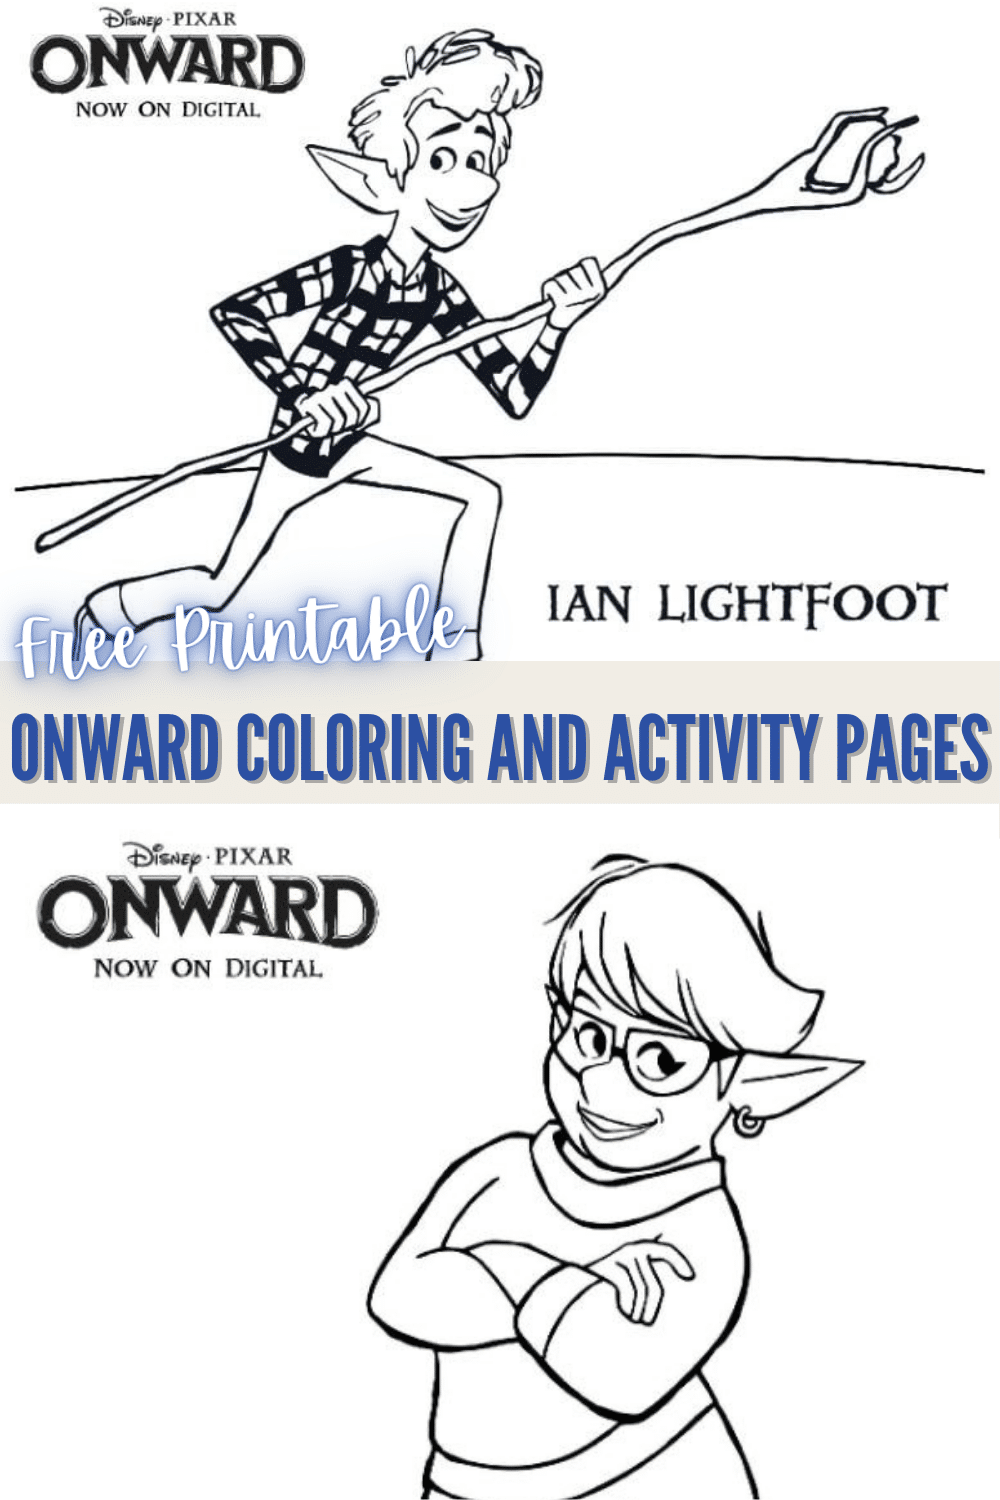 Your child will love these free printable ONWARD Coloring and Activity Pages. There's six printable coloring pages featuring key characters from the movie. #onward #printable #kidsactivities #coloringpage via @wondermomwannab